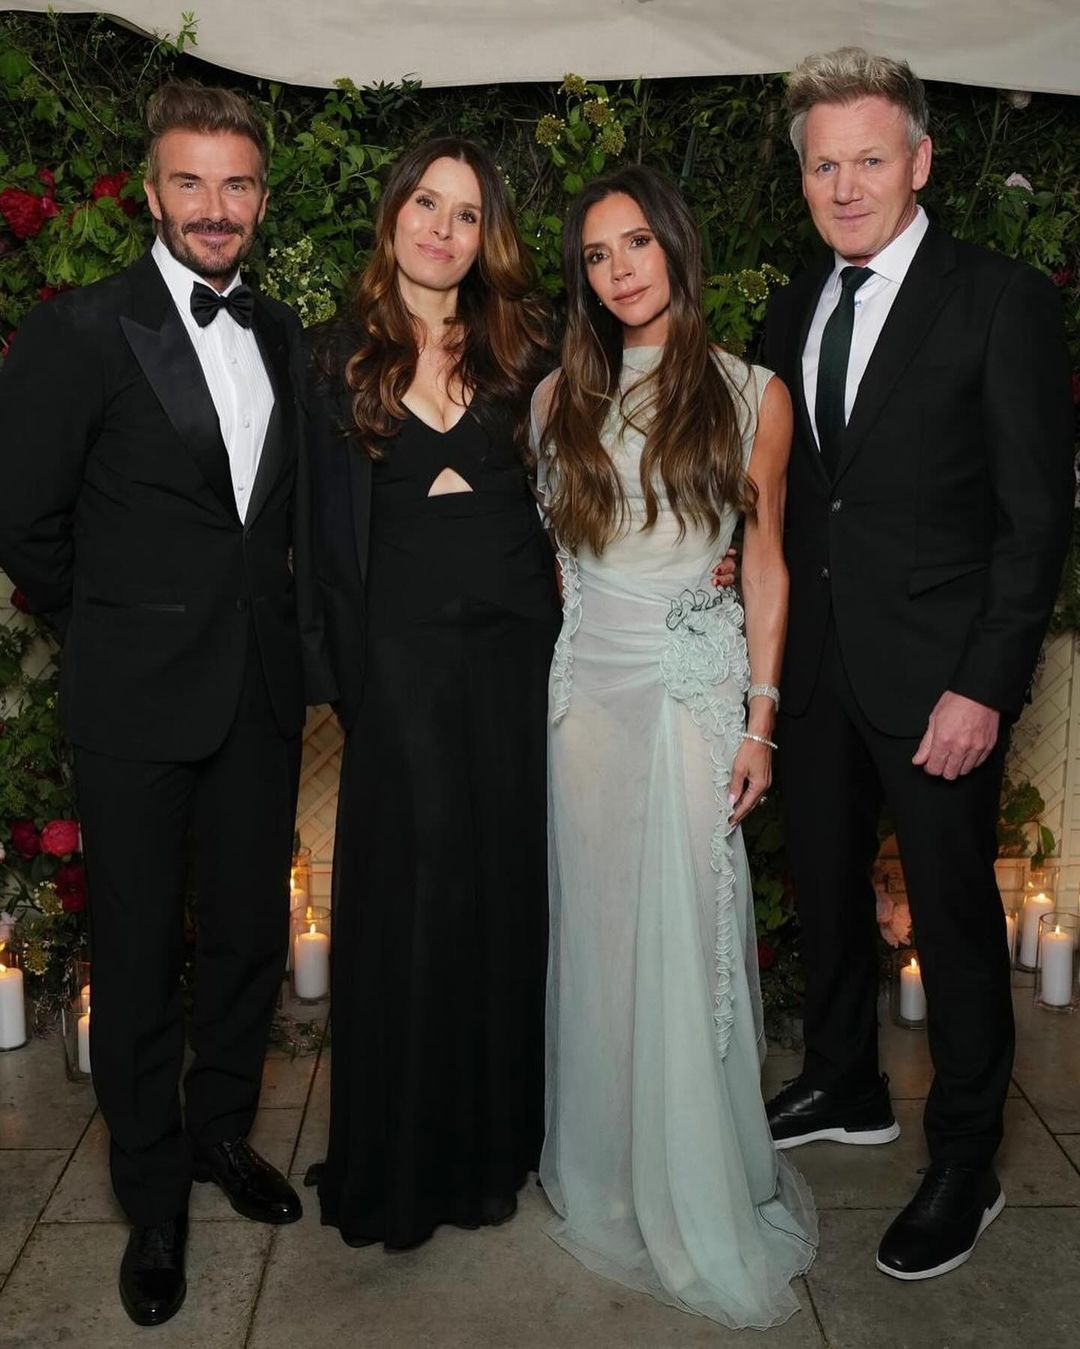 David Beckham, Tana Ramsay, Victoria Beckham, and Gordon Ramsay at Victoria's birthday Party in London, England, from a Instagram post dated April 22, 2024. | Source: Instagram/davidbeckham/